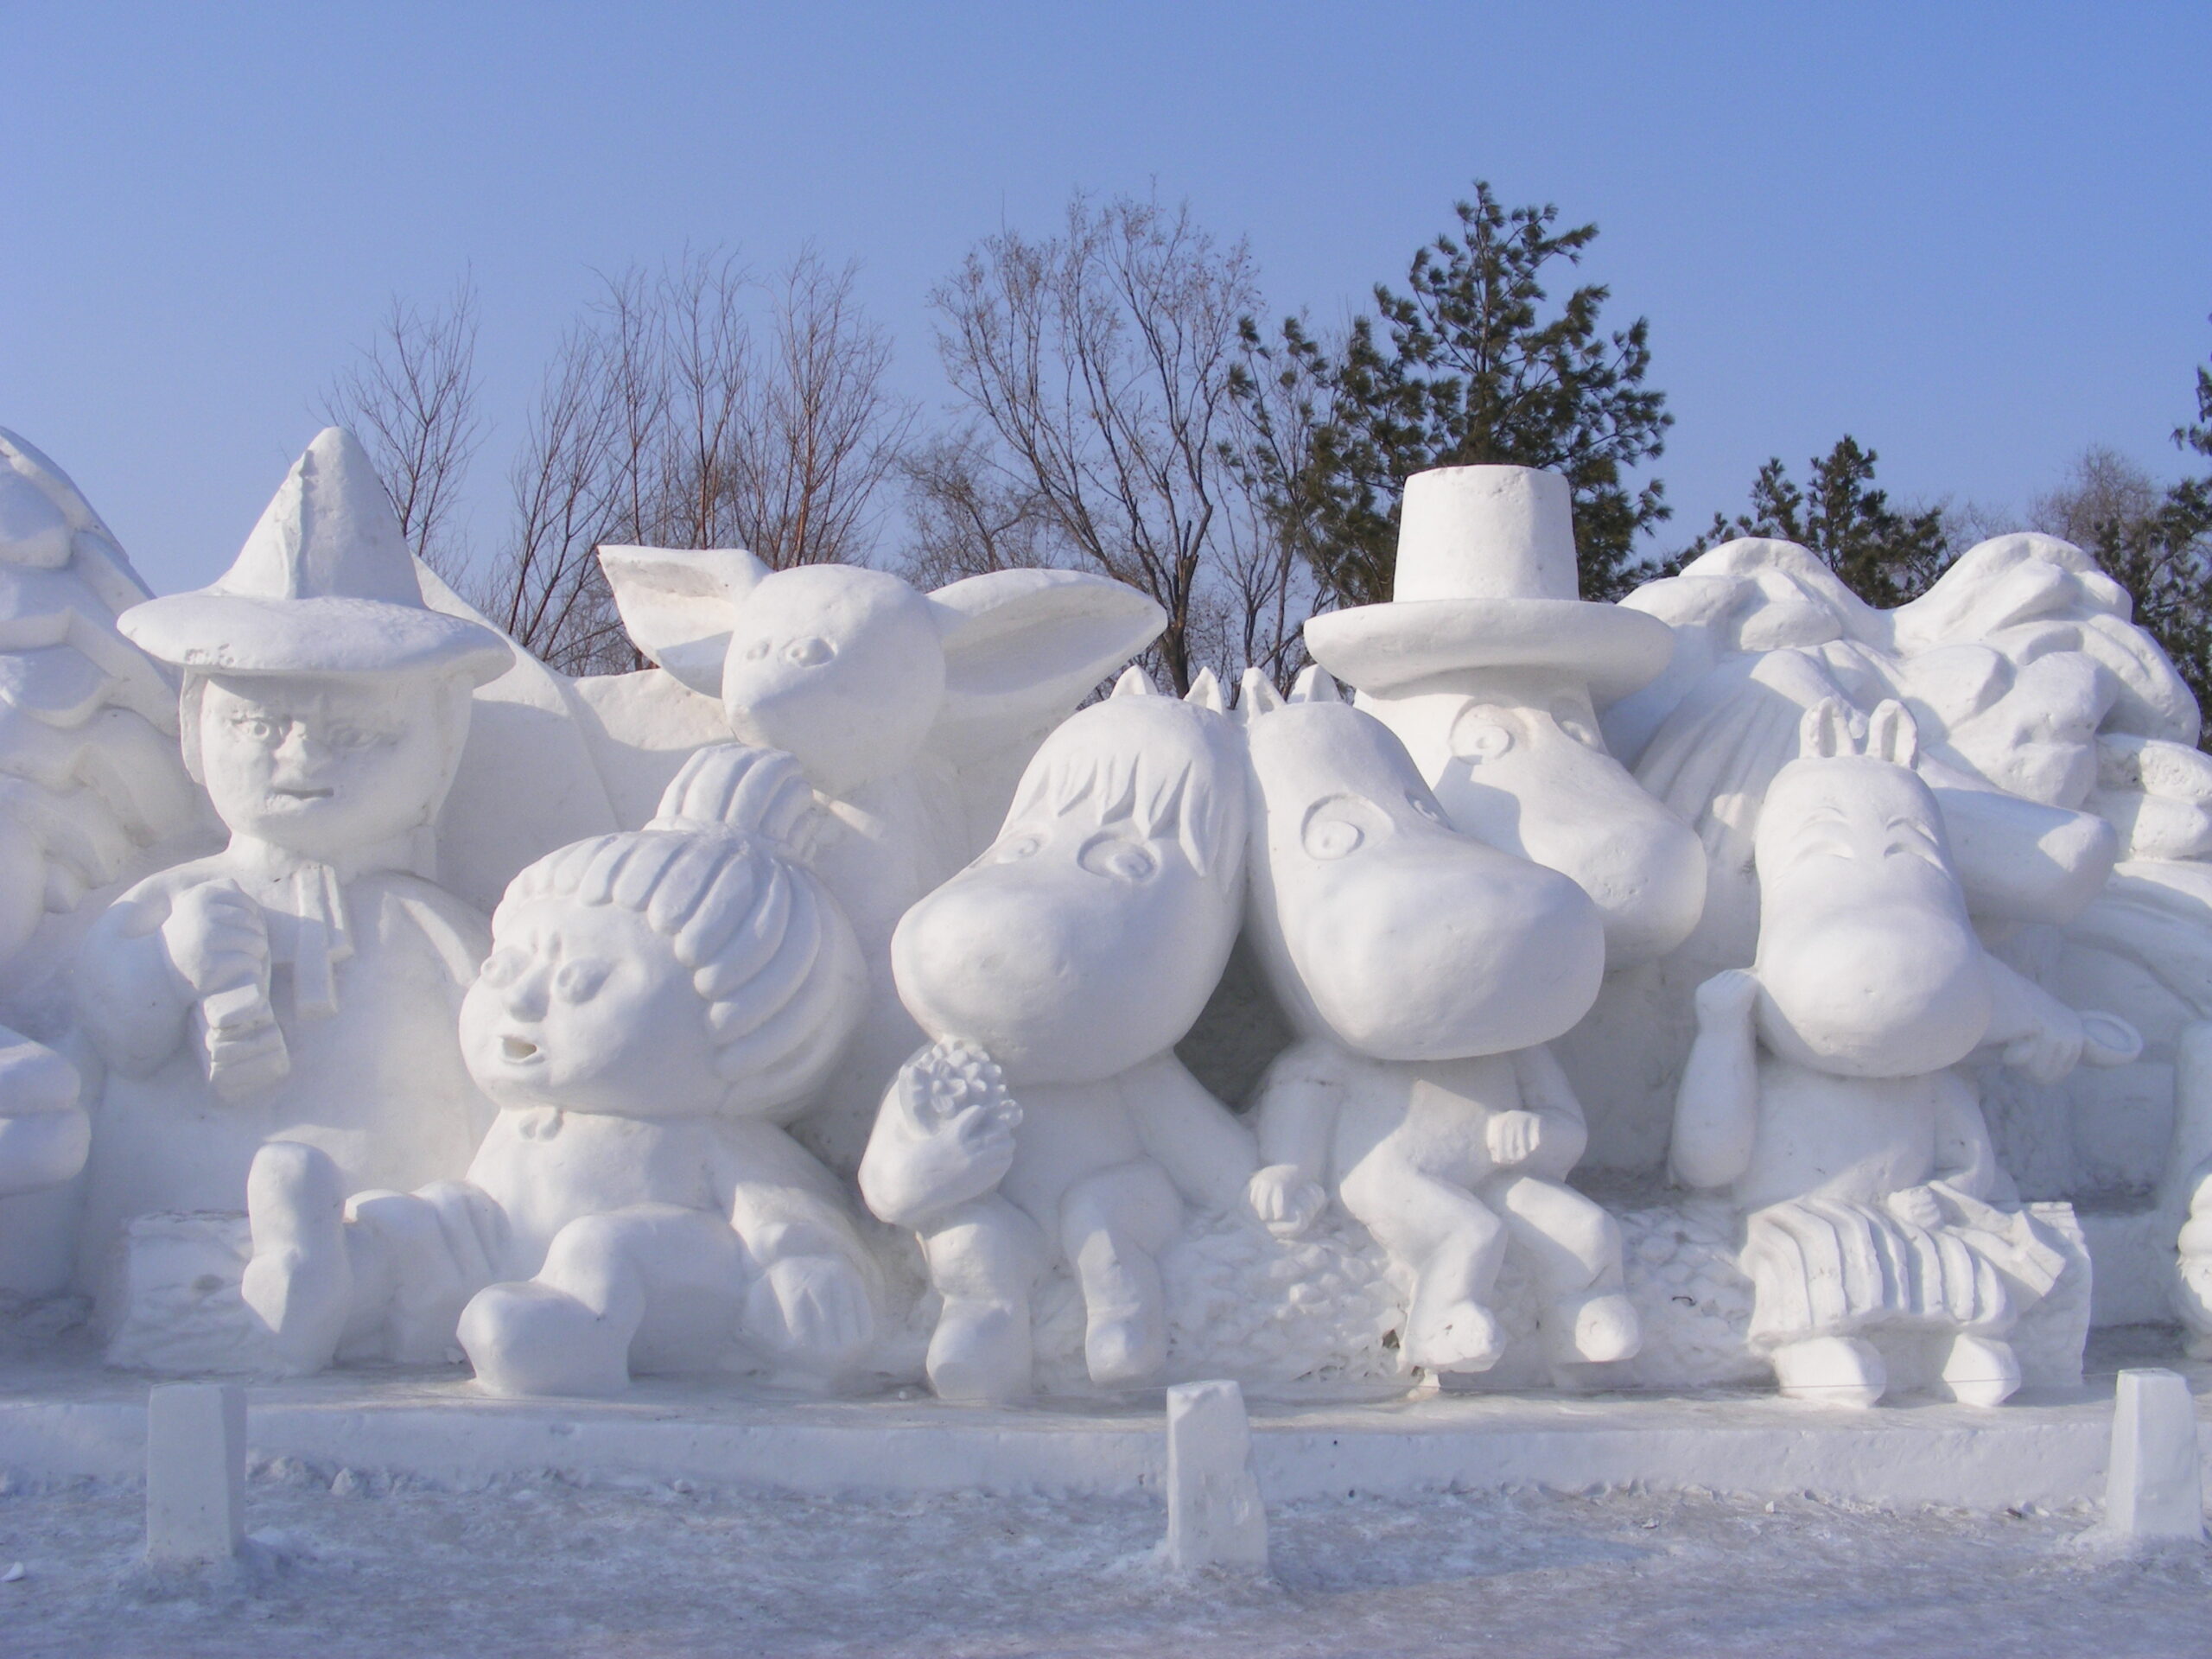 World's Ice and Snow Festivals